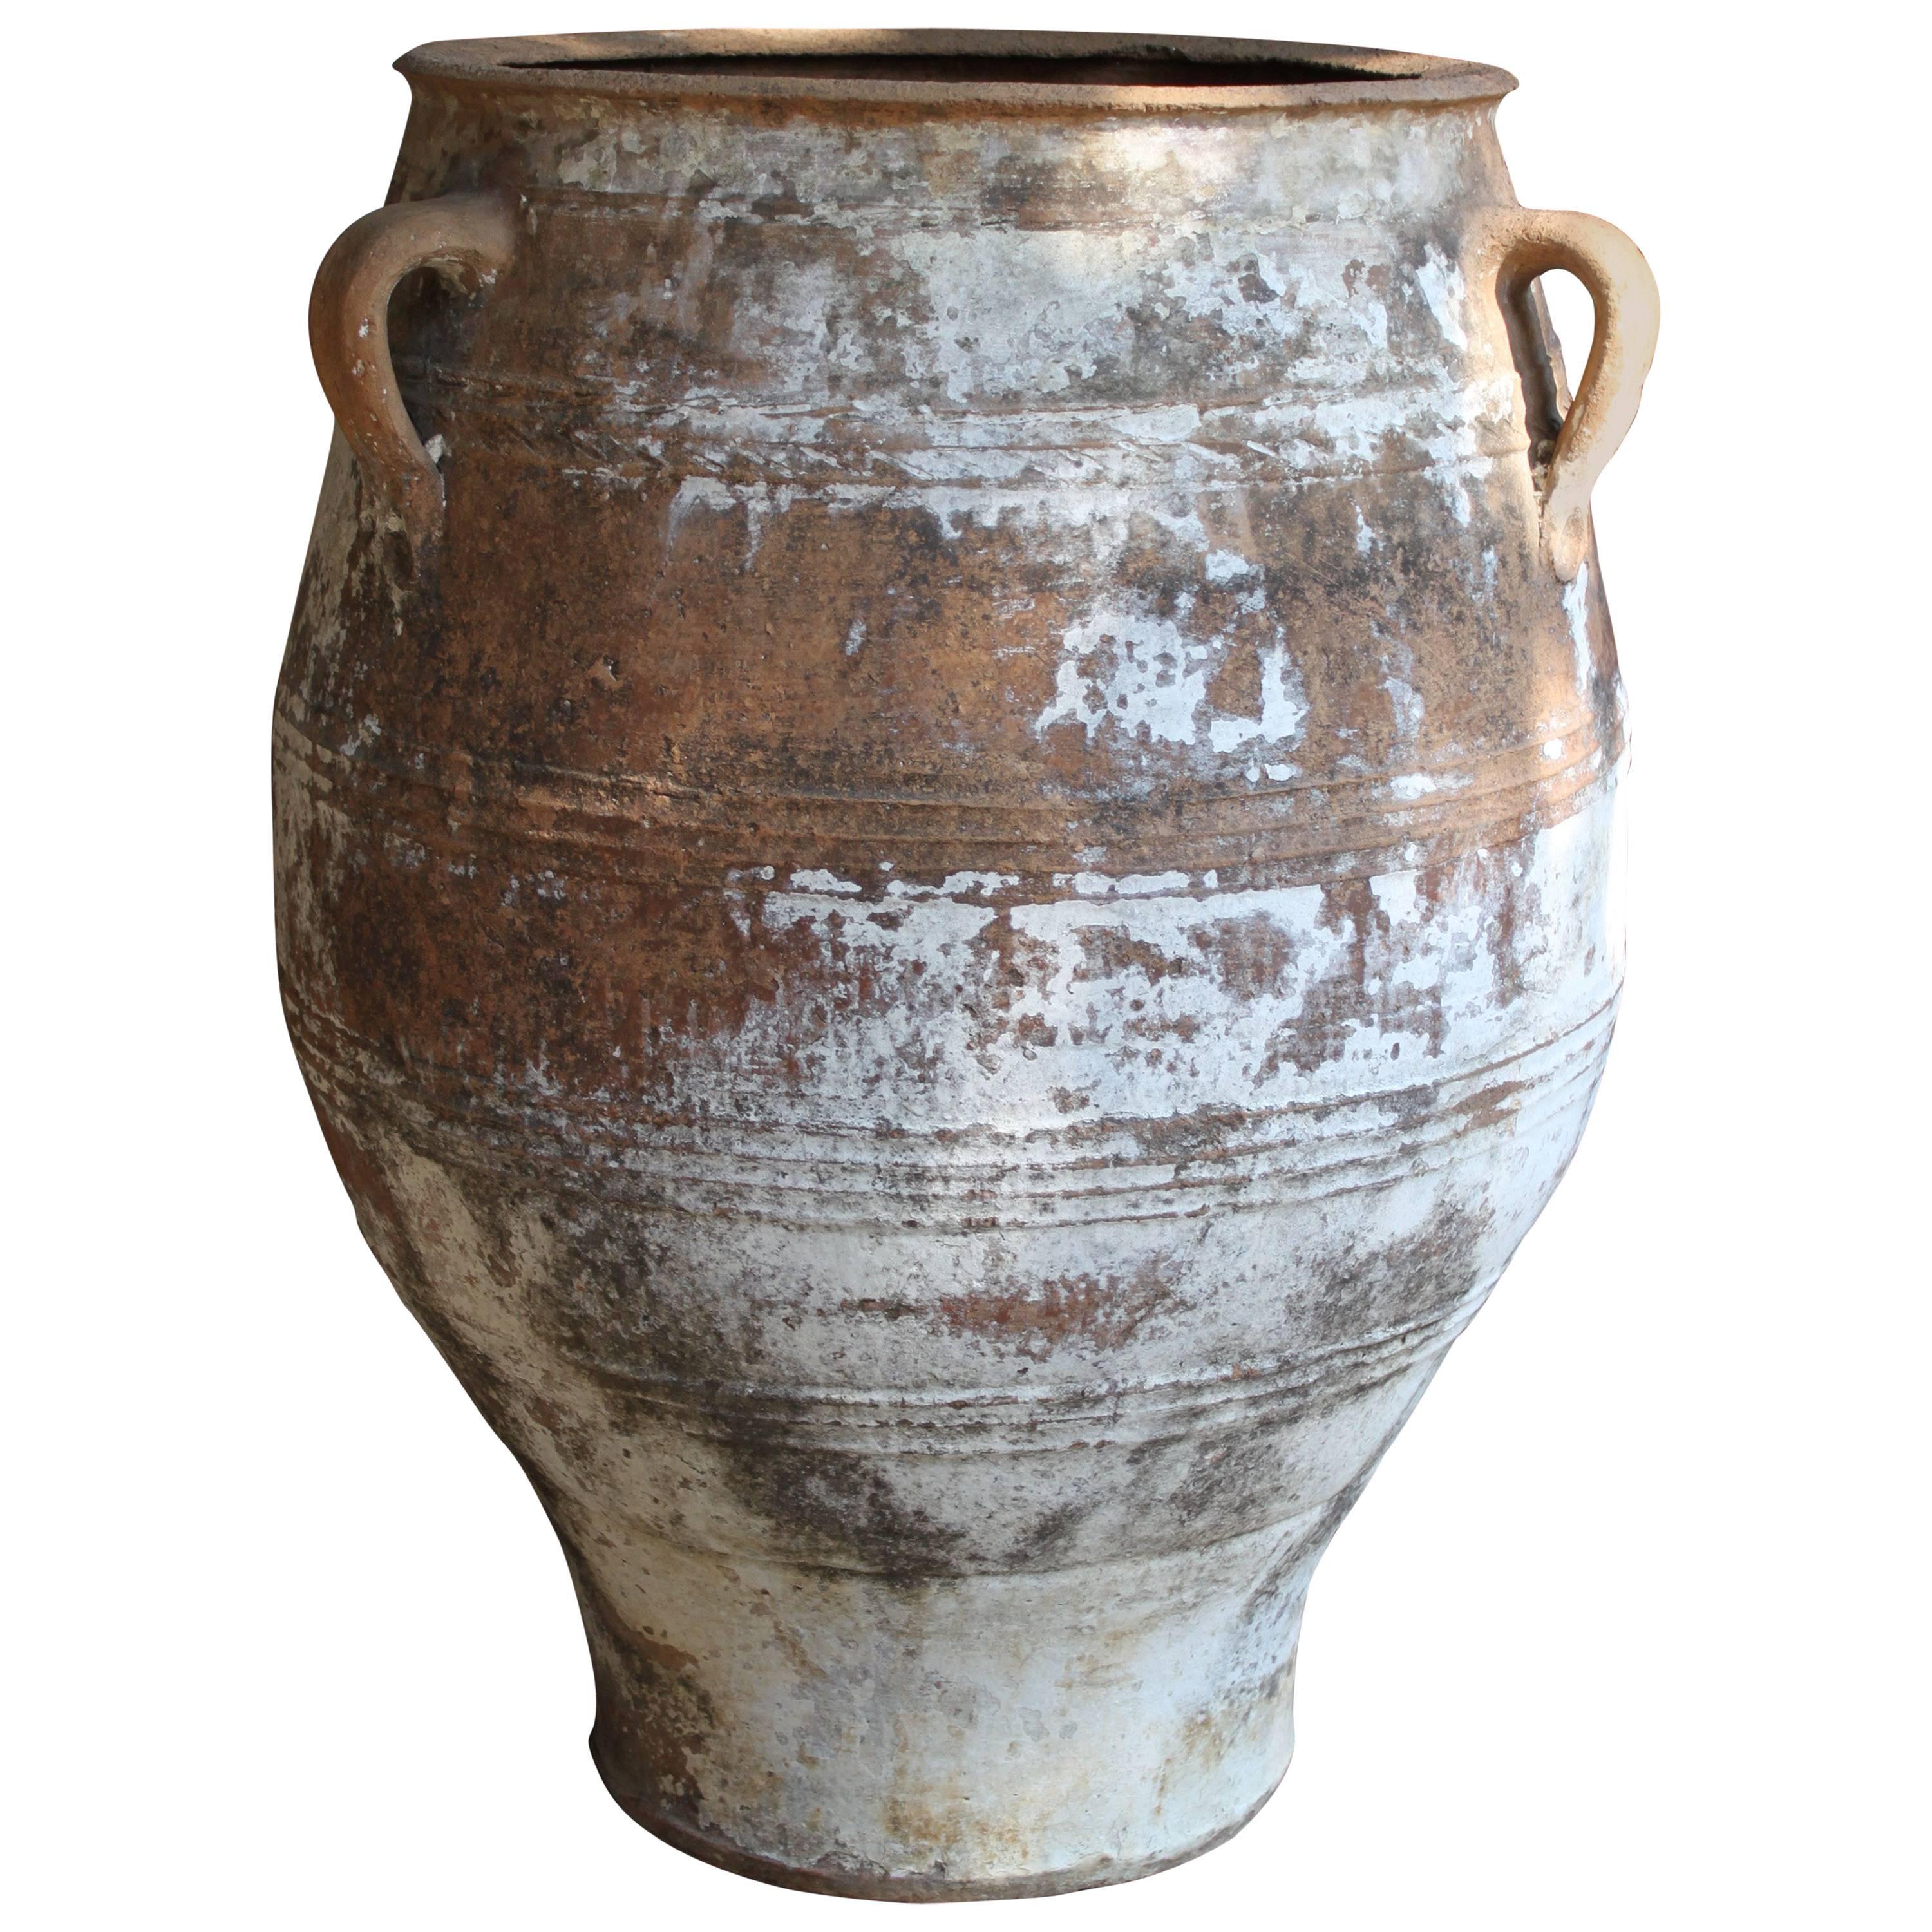 Very Large Terra Cotta Pot from South of France, 19th Century